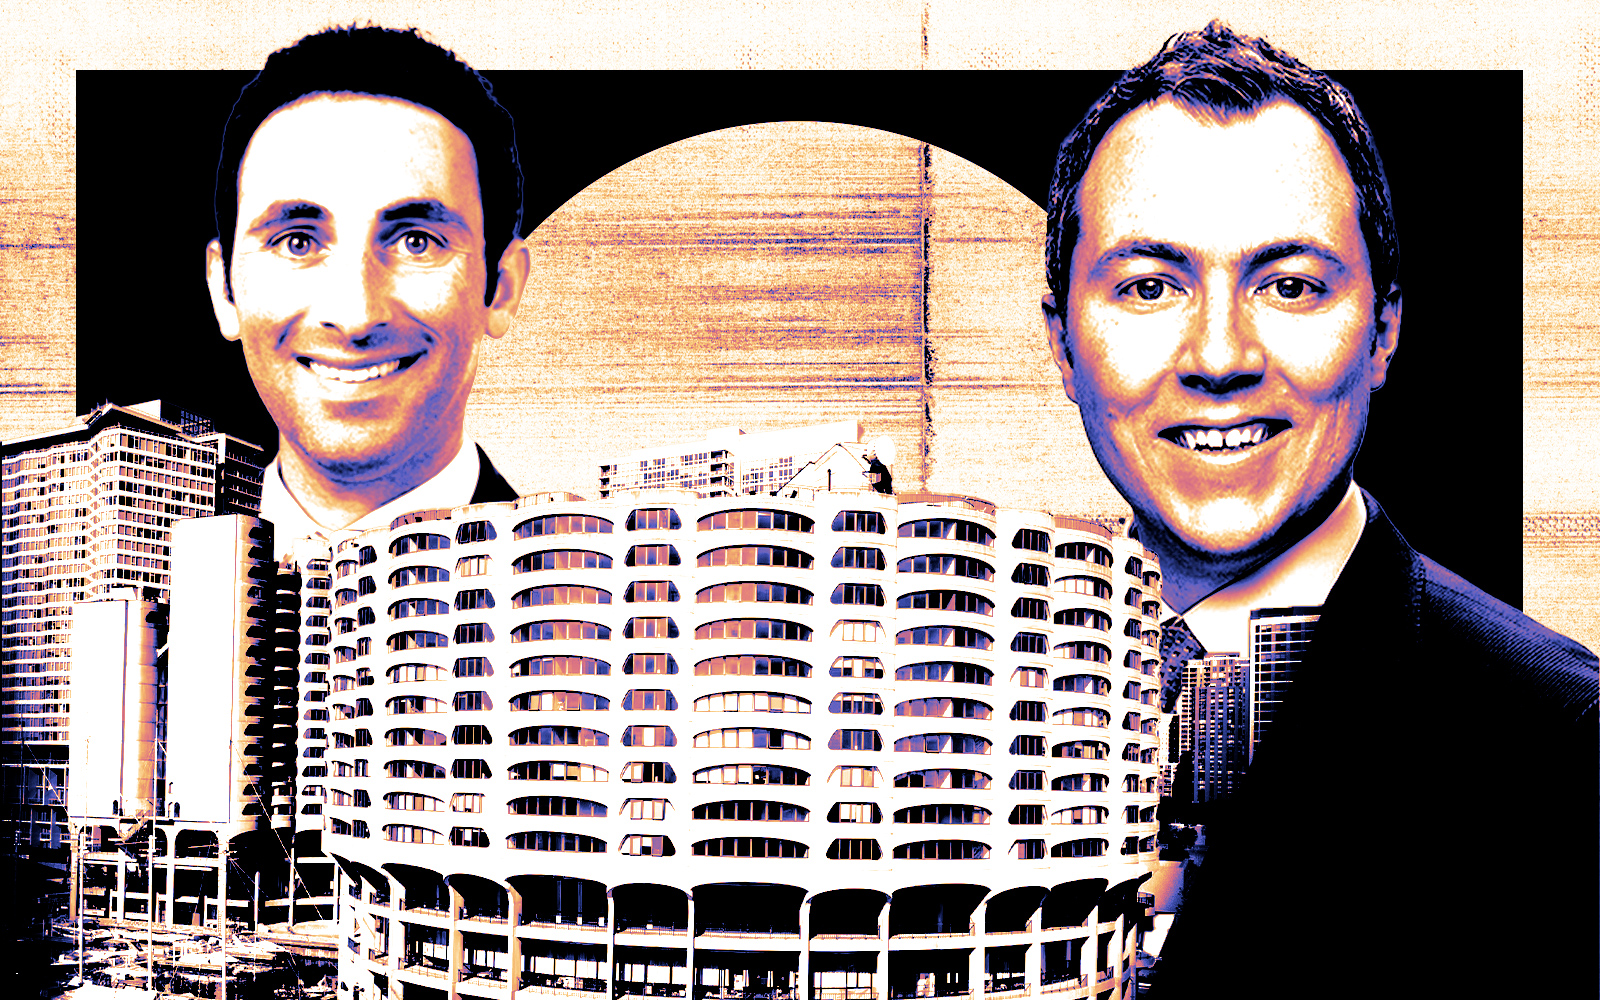 Marc, SPNA try cashing out of condo deconversion plays